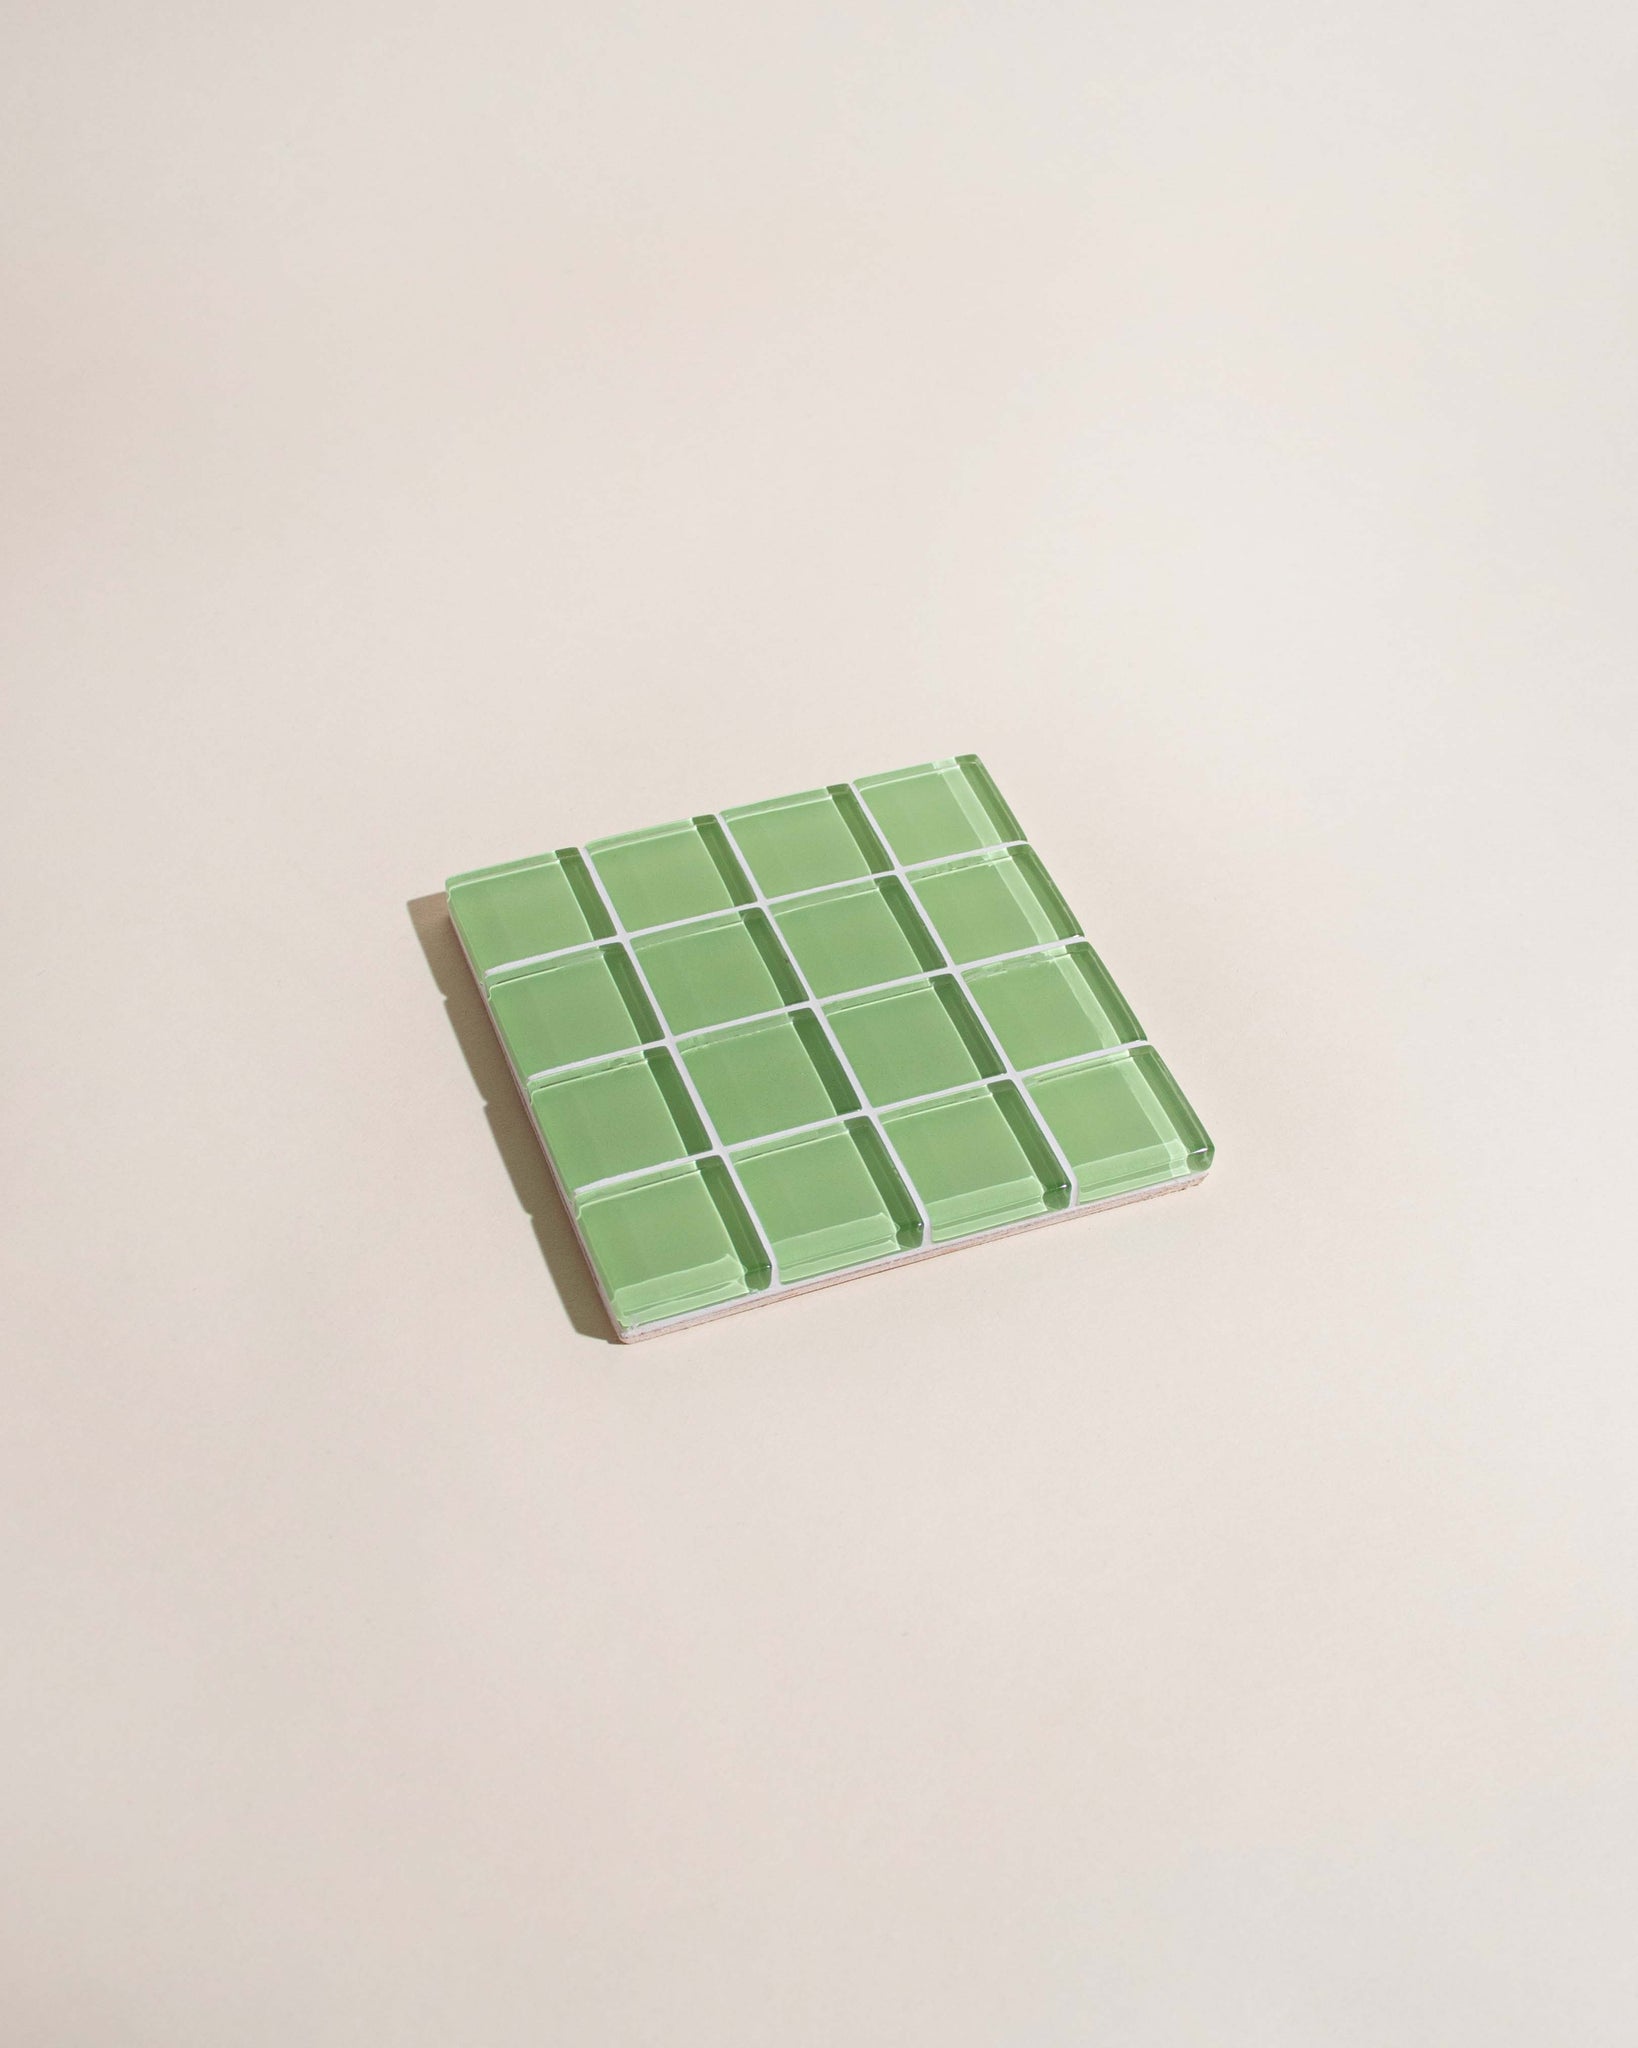 GLASS TILE COASTER - It's Lime